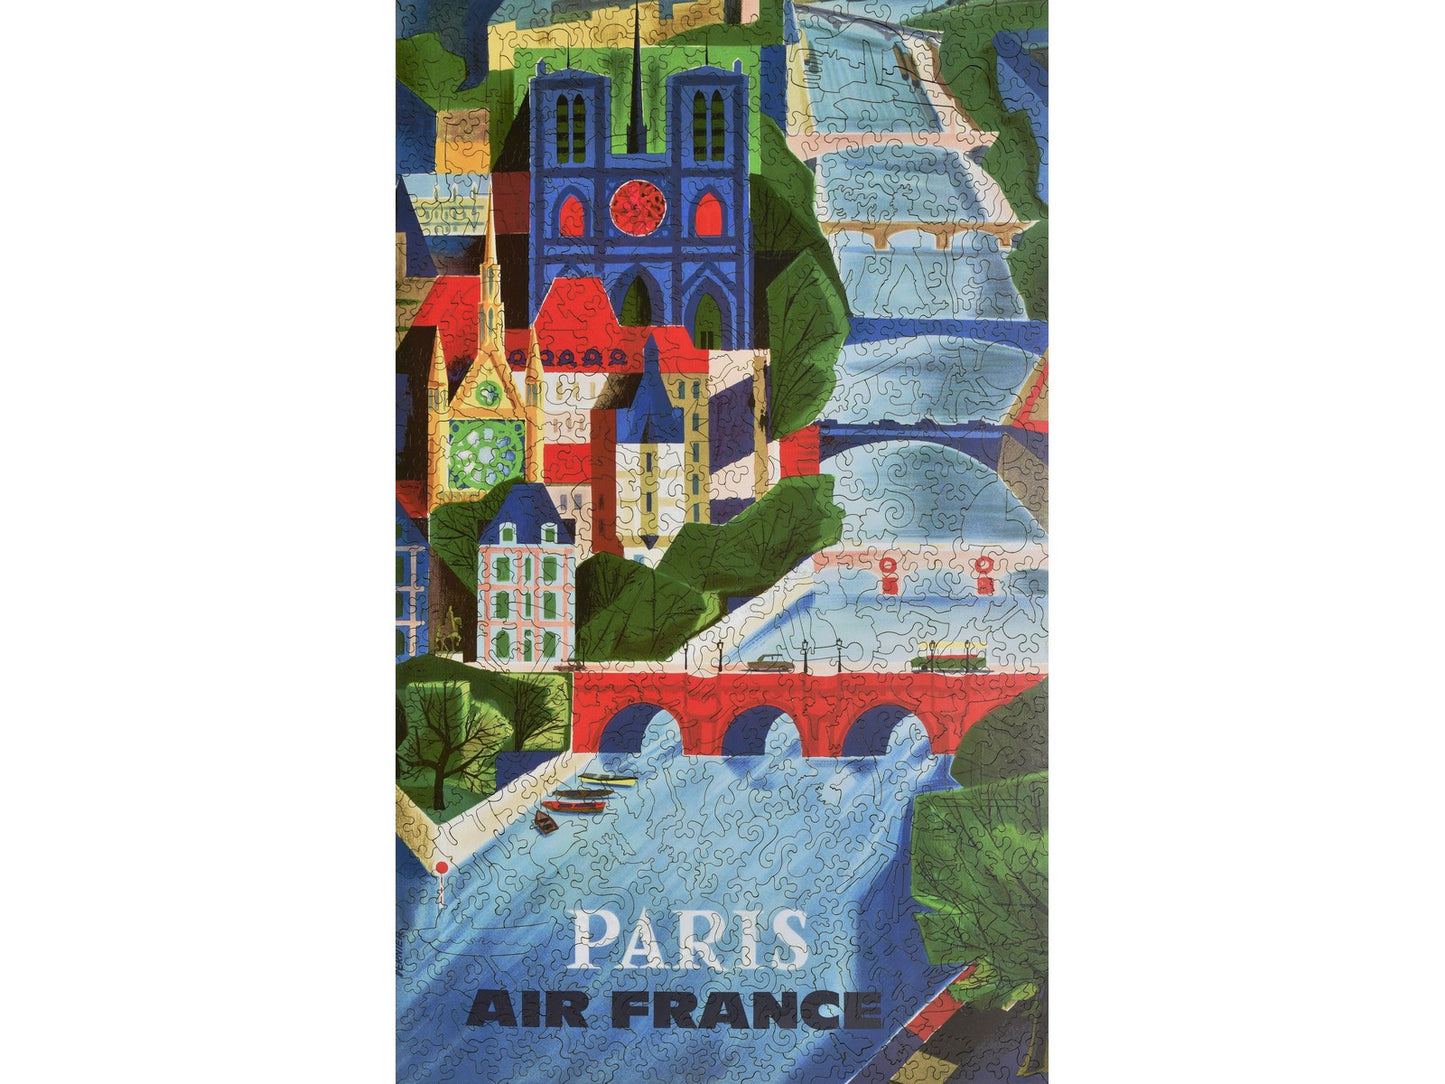 The front of the puzzle, Paris Air France showing the Seine River flowing through the city.